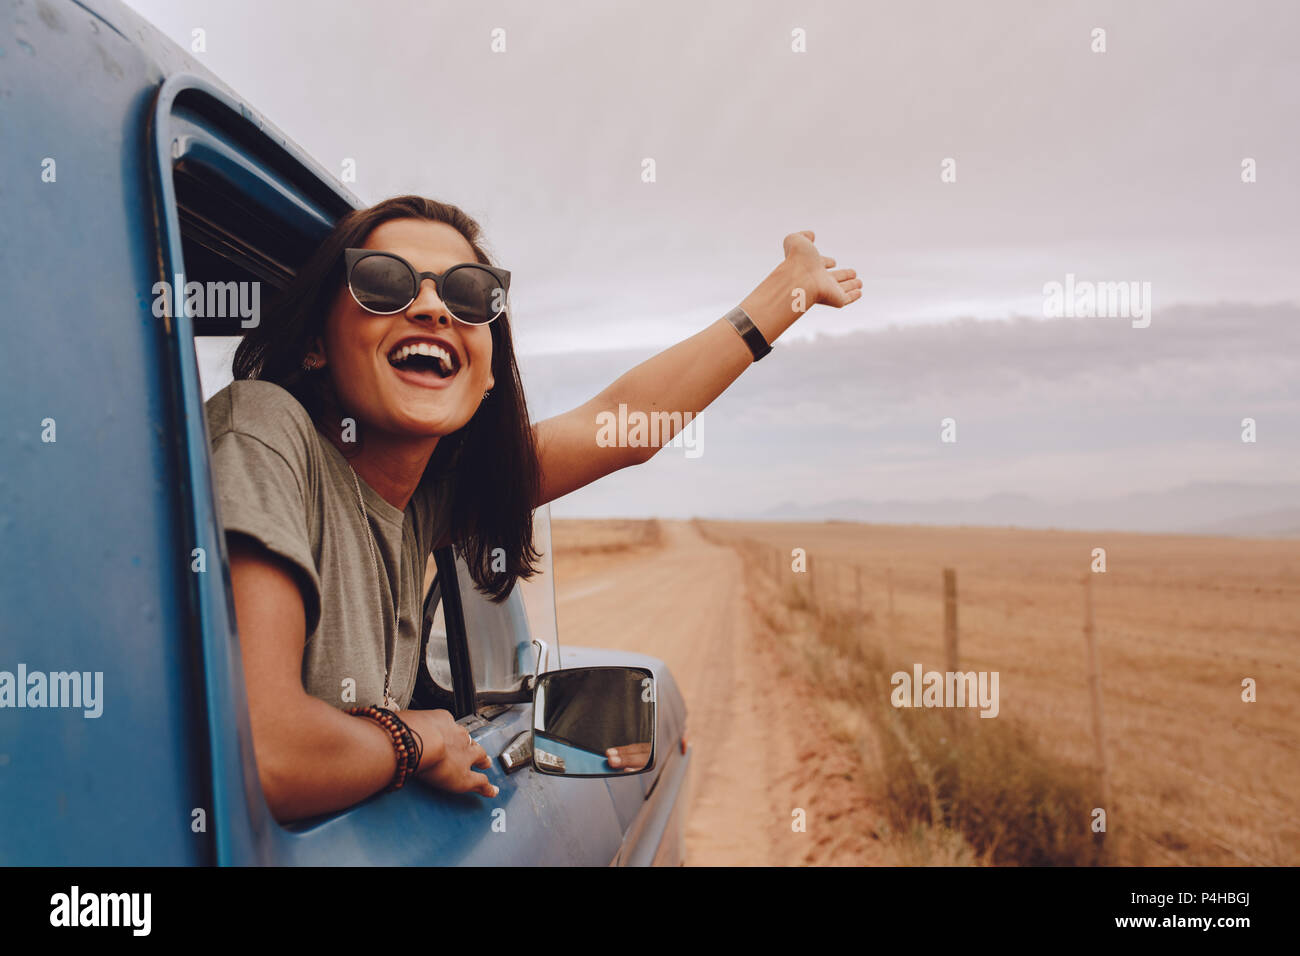 Happy woman out on a road trip in a car. Young female raising her hand out of the car. Enjoying on countryside road trip. Stock Photo